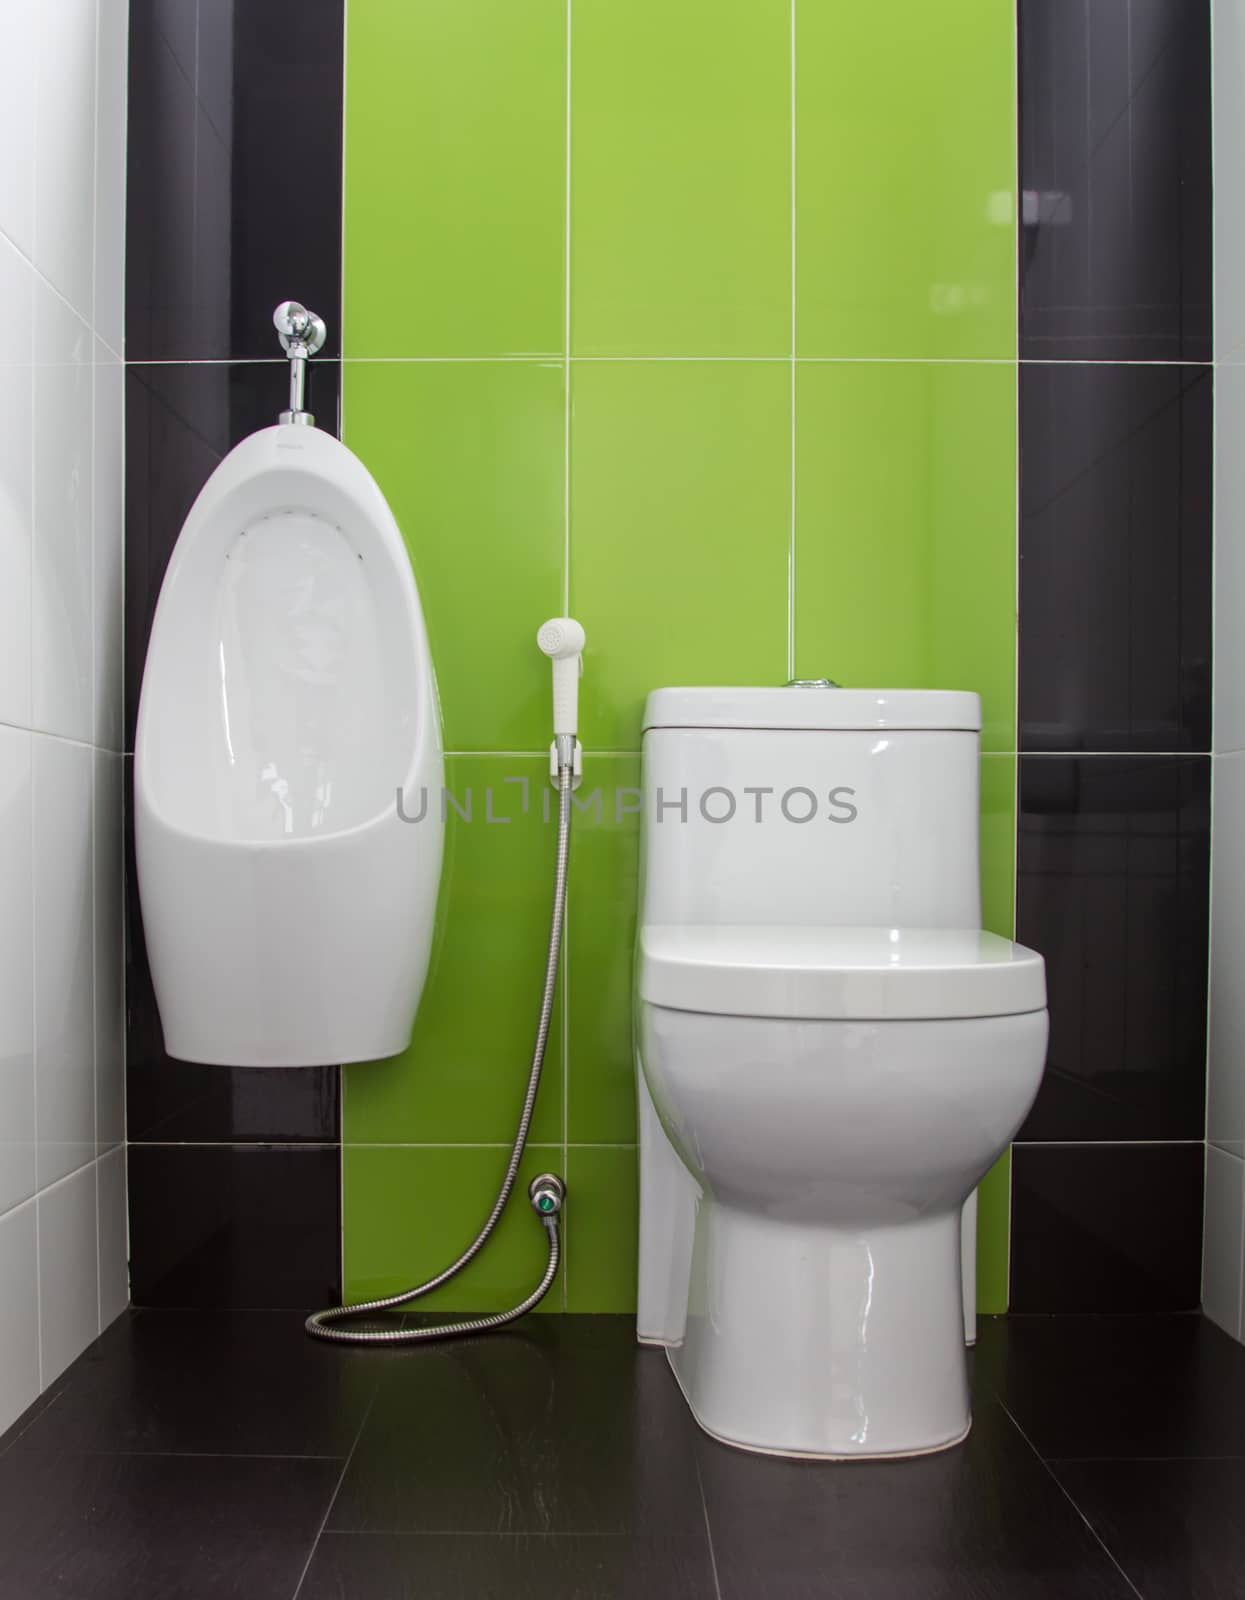 Toilet in gray and green tiled bathroom